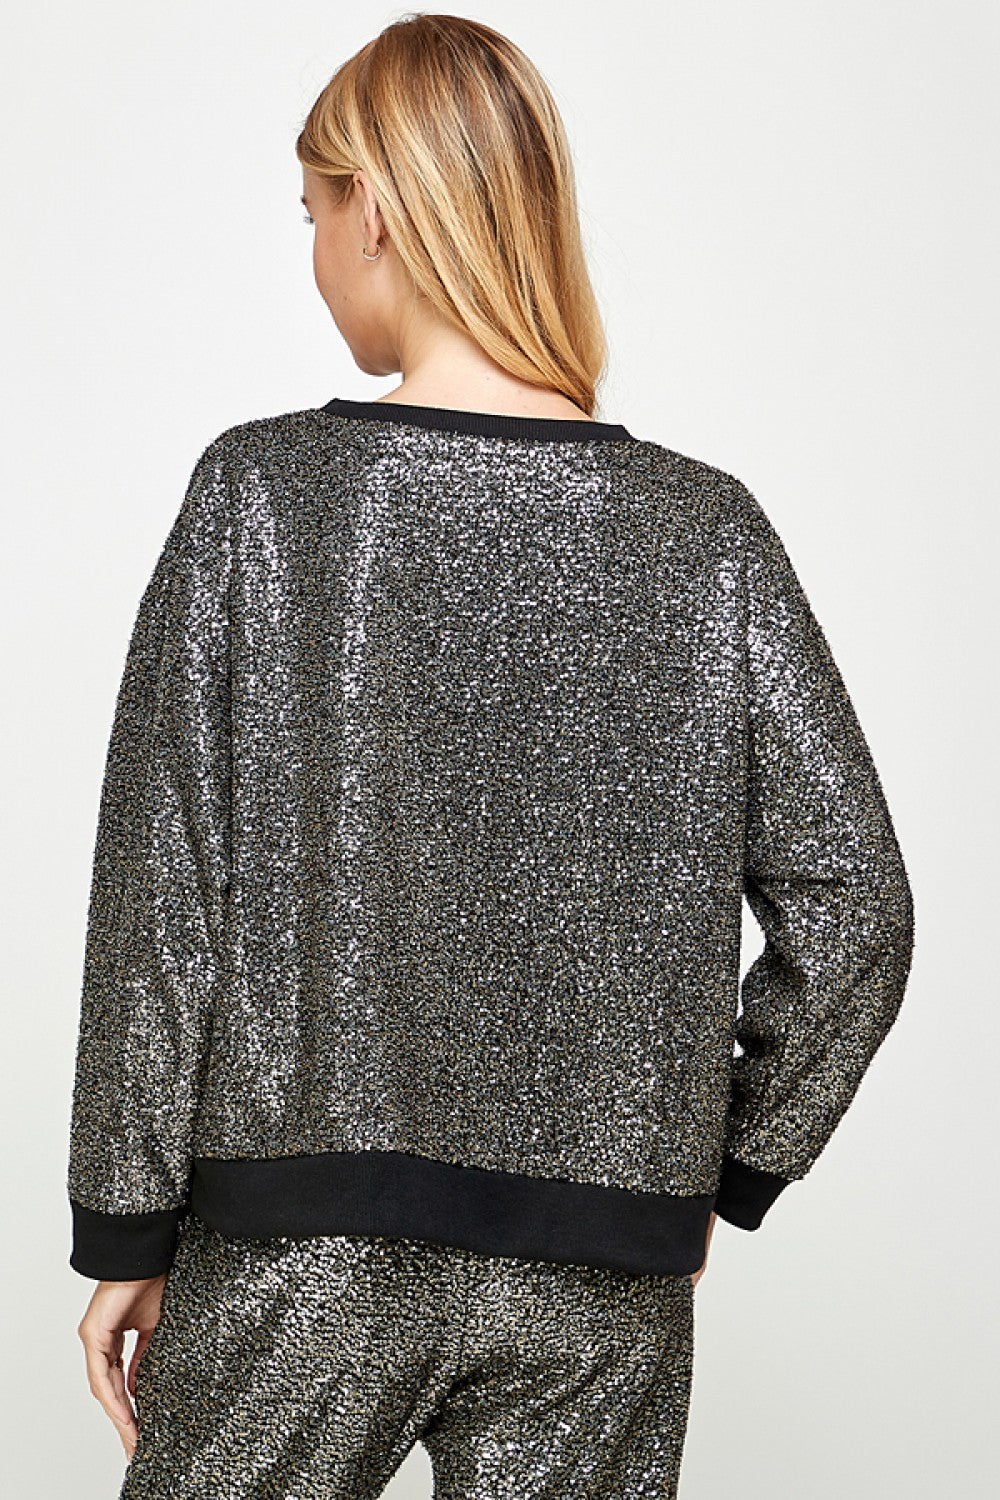 Pewter Sequins Long Sleeve Top